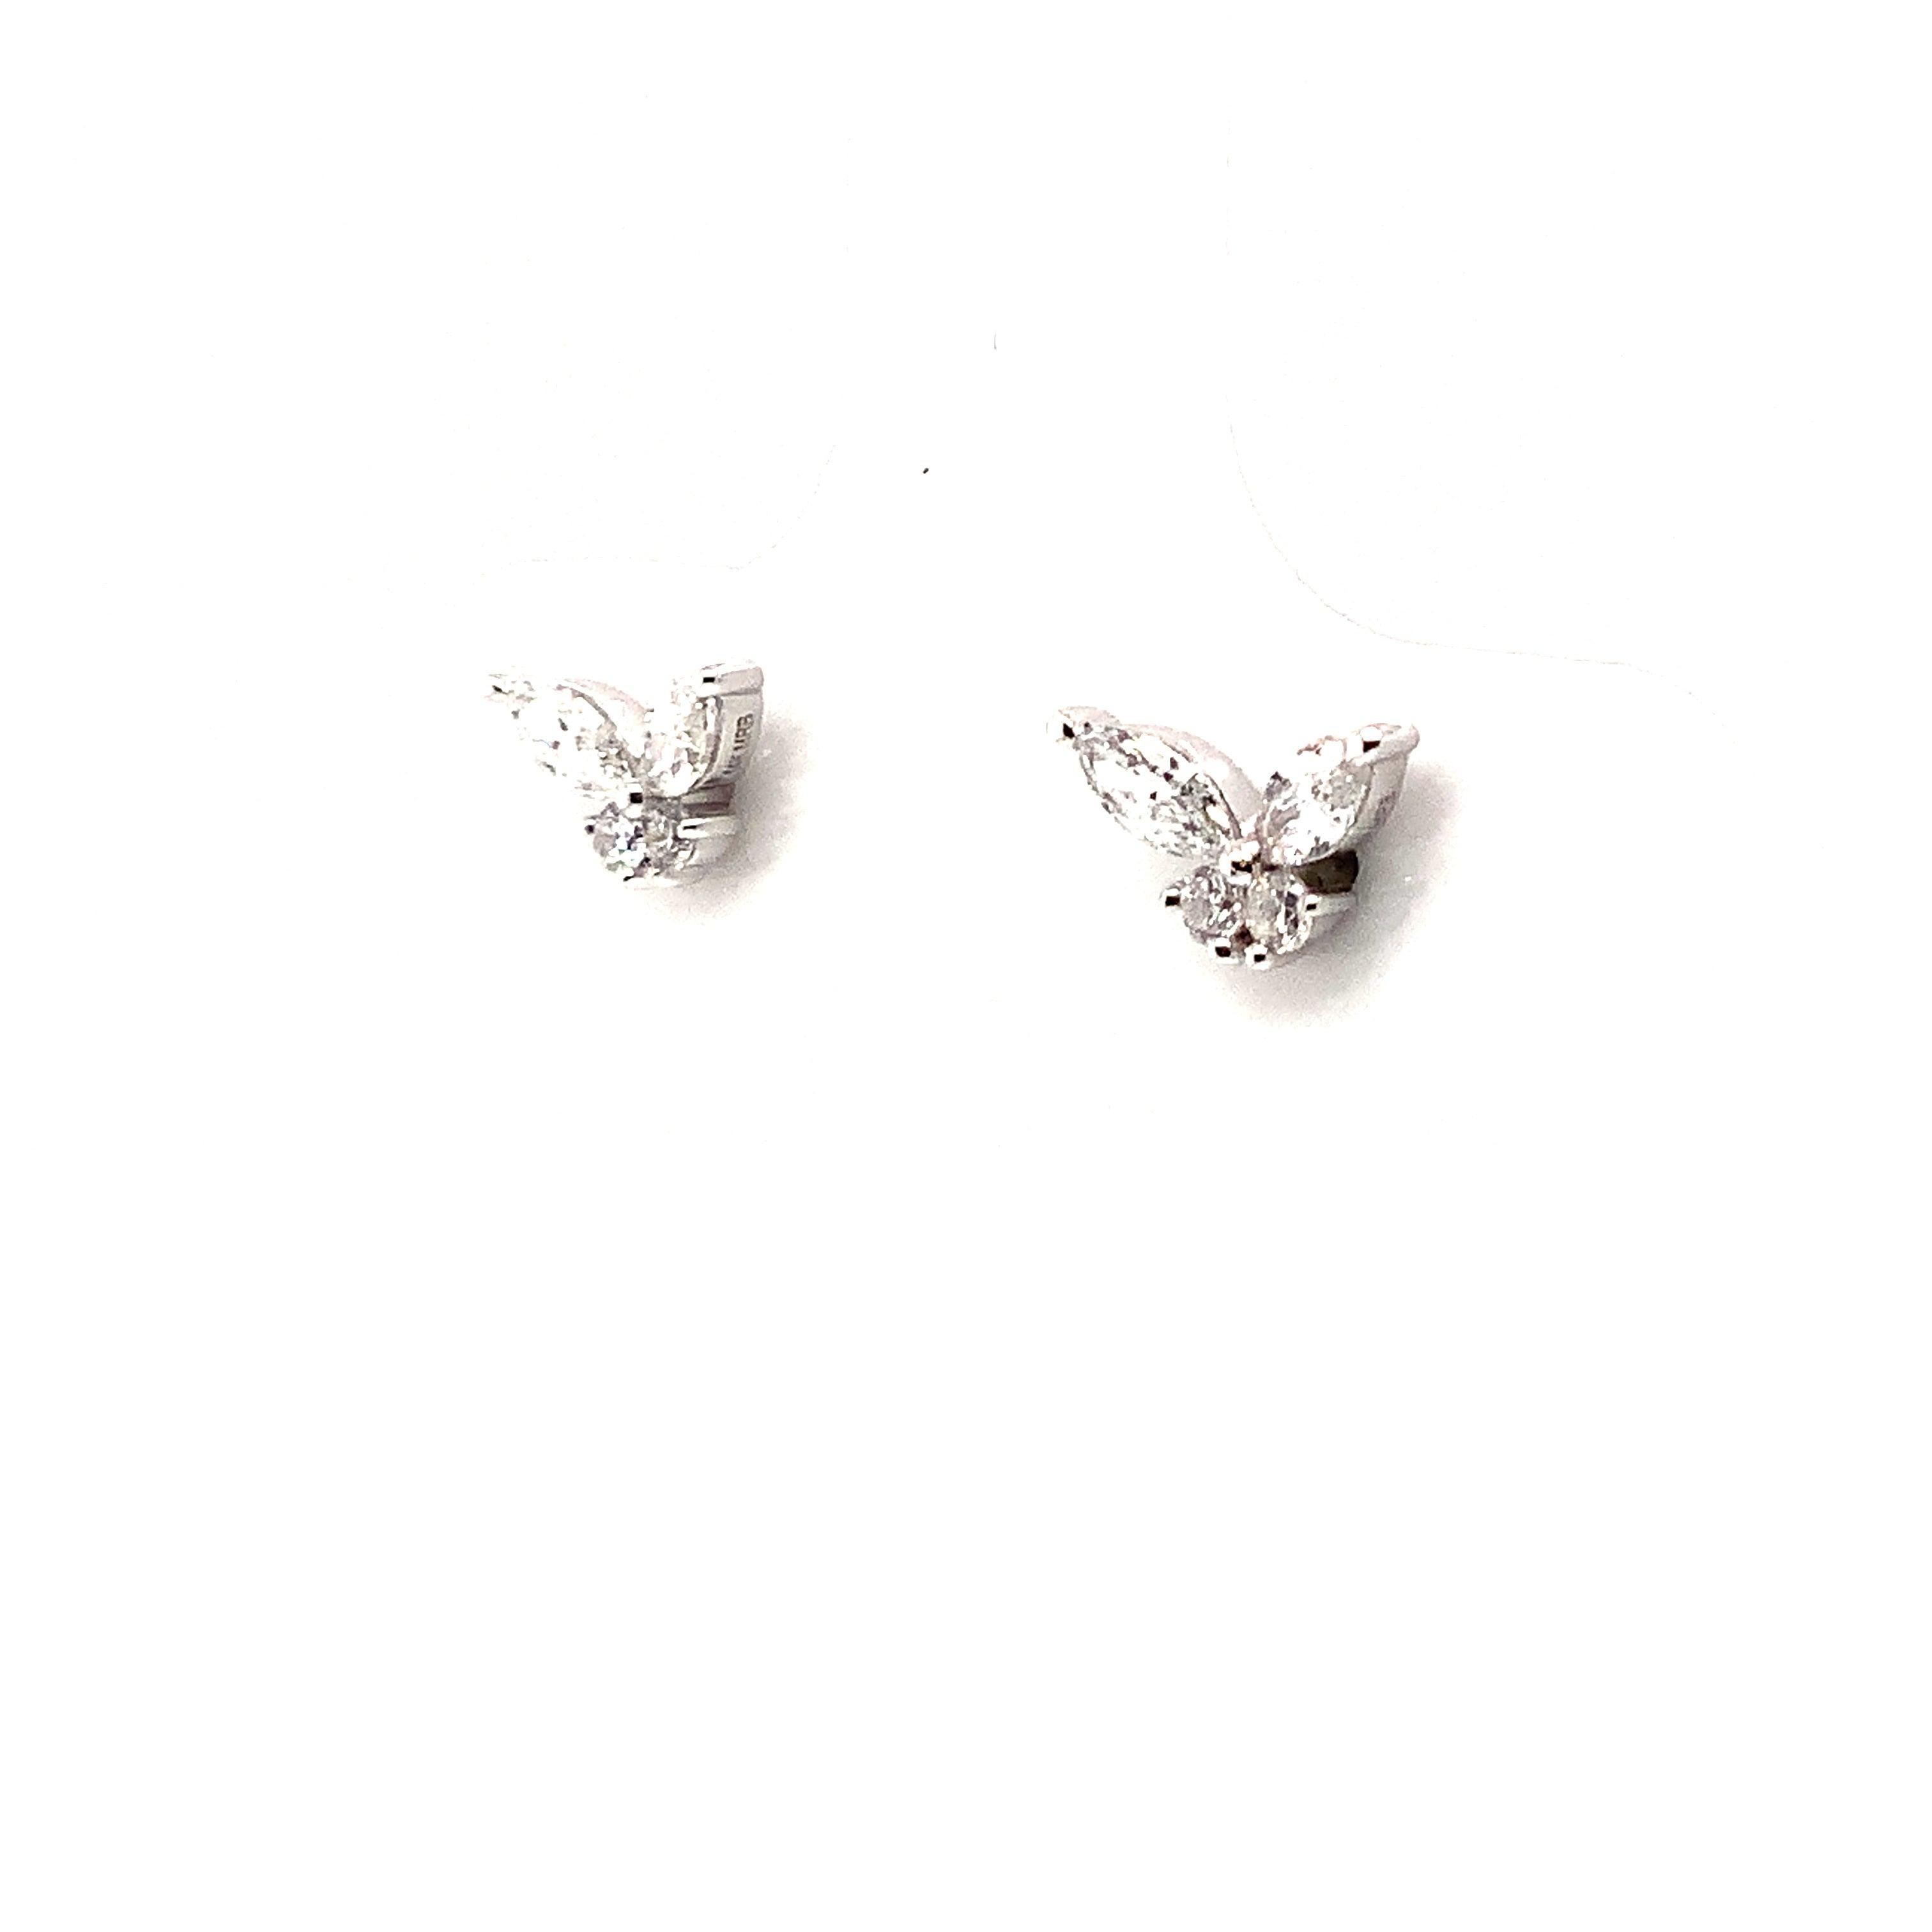 Little Butterfly Diamond Stud Earring Set in 14K White Gold

Additional Information:
These precious little beauties are so bright and lively surly to liven up your day!
4 Round Diamonds =0.06 
2 Marquise Diamonds =0.25 F Color
VS Clarity
7.79 x 4.14